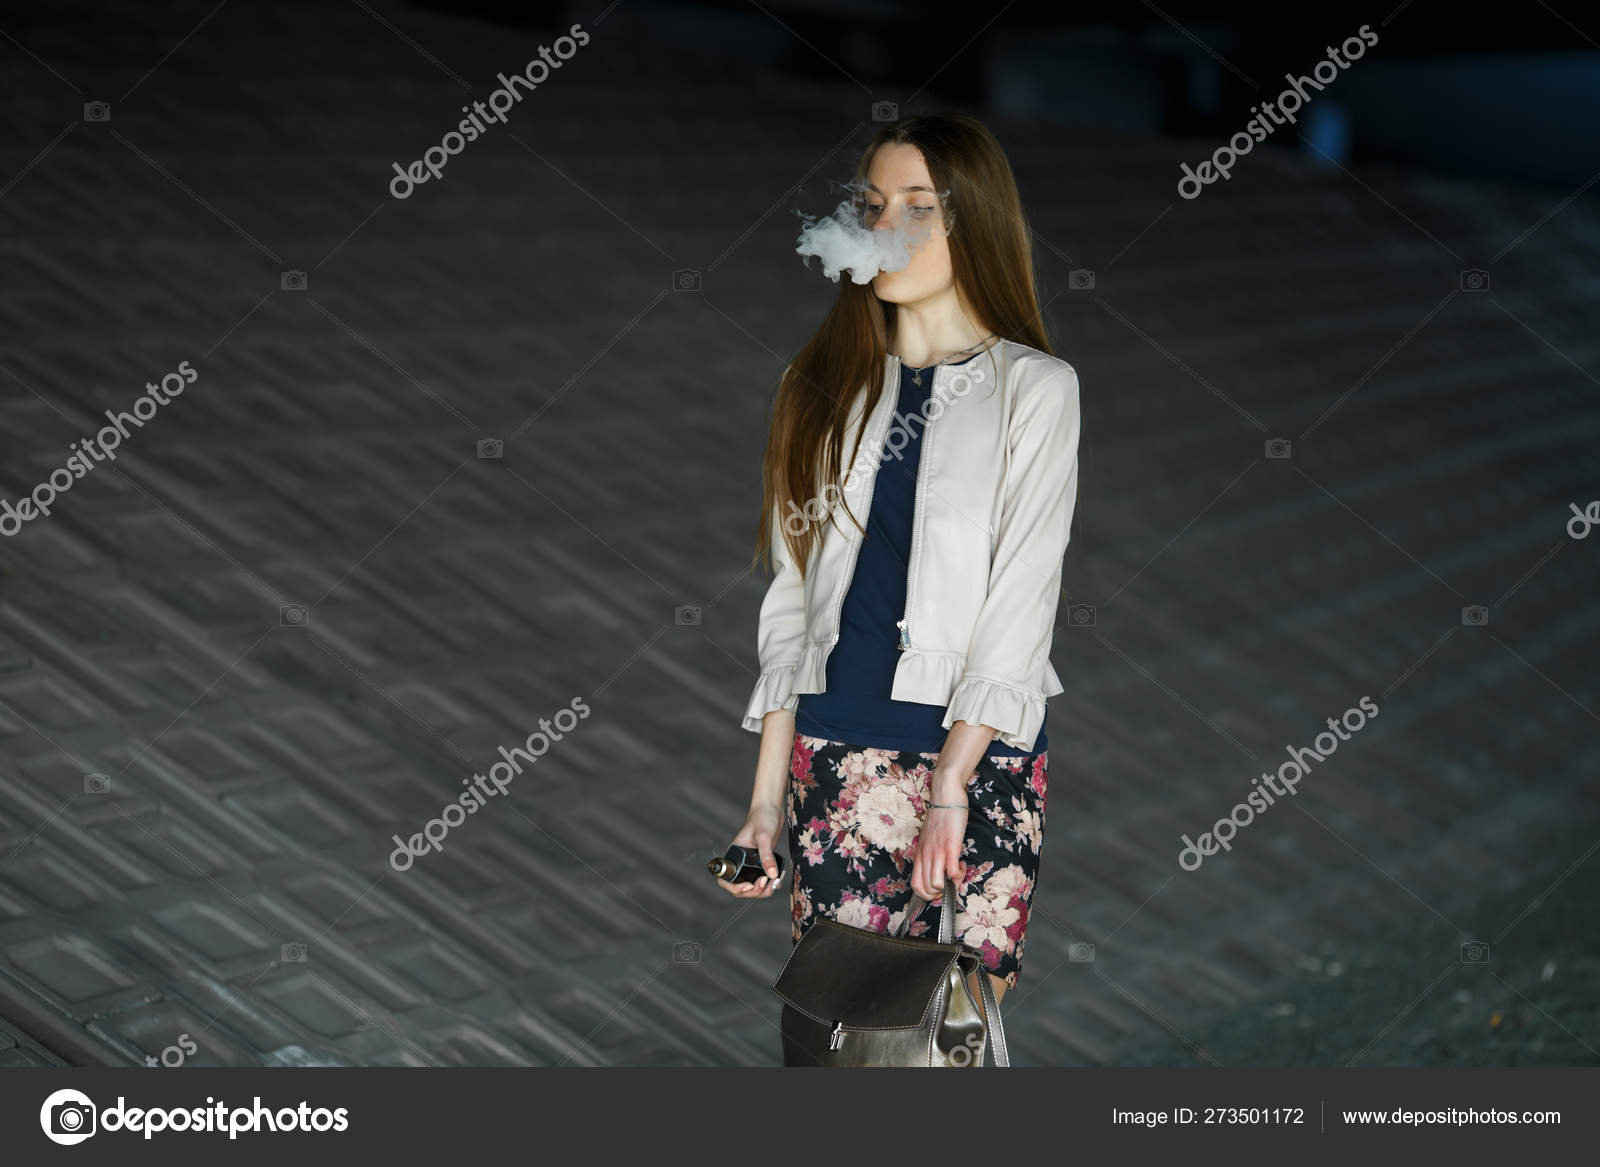 Teenager Young Cute Girl Casual Clothes Smokes Electronic Cigarette Stock Photo by ©creativephotographing.mail.ru 273501172